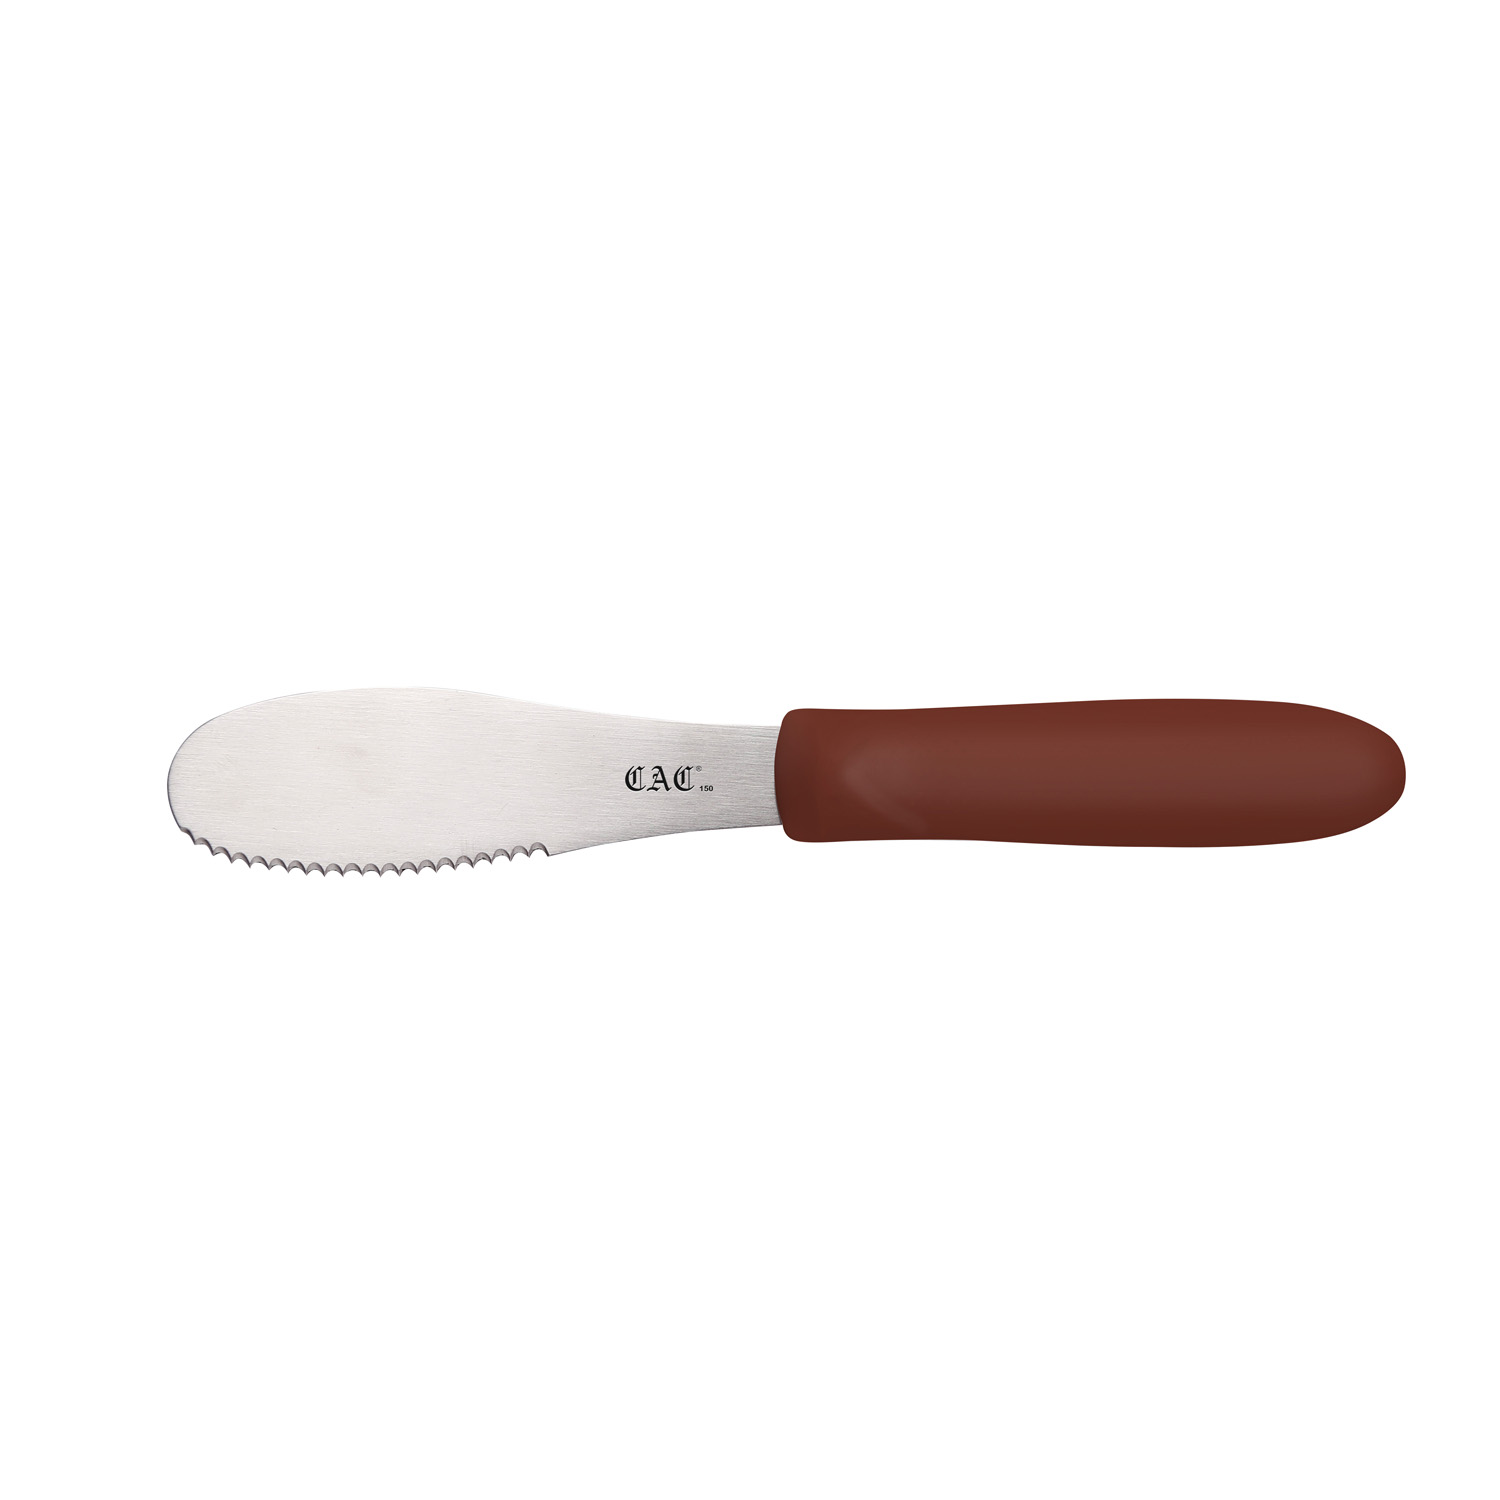 CAC China SPSP-4BN Brown Serrated Spreader with Plastic Handle 3-7/8"